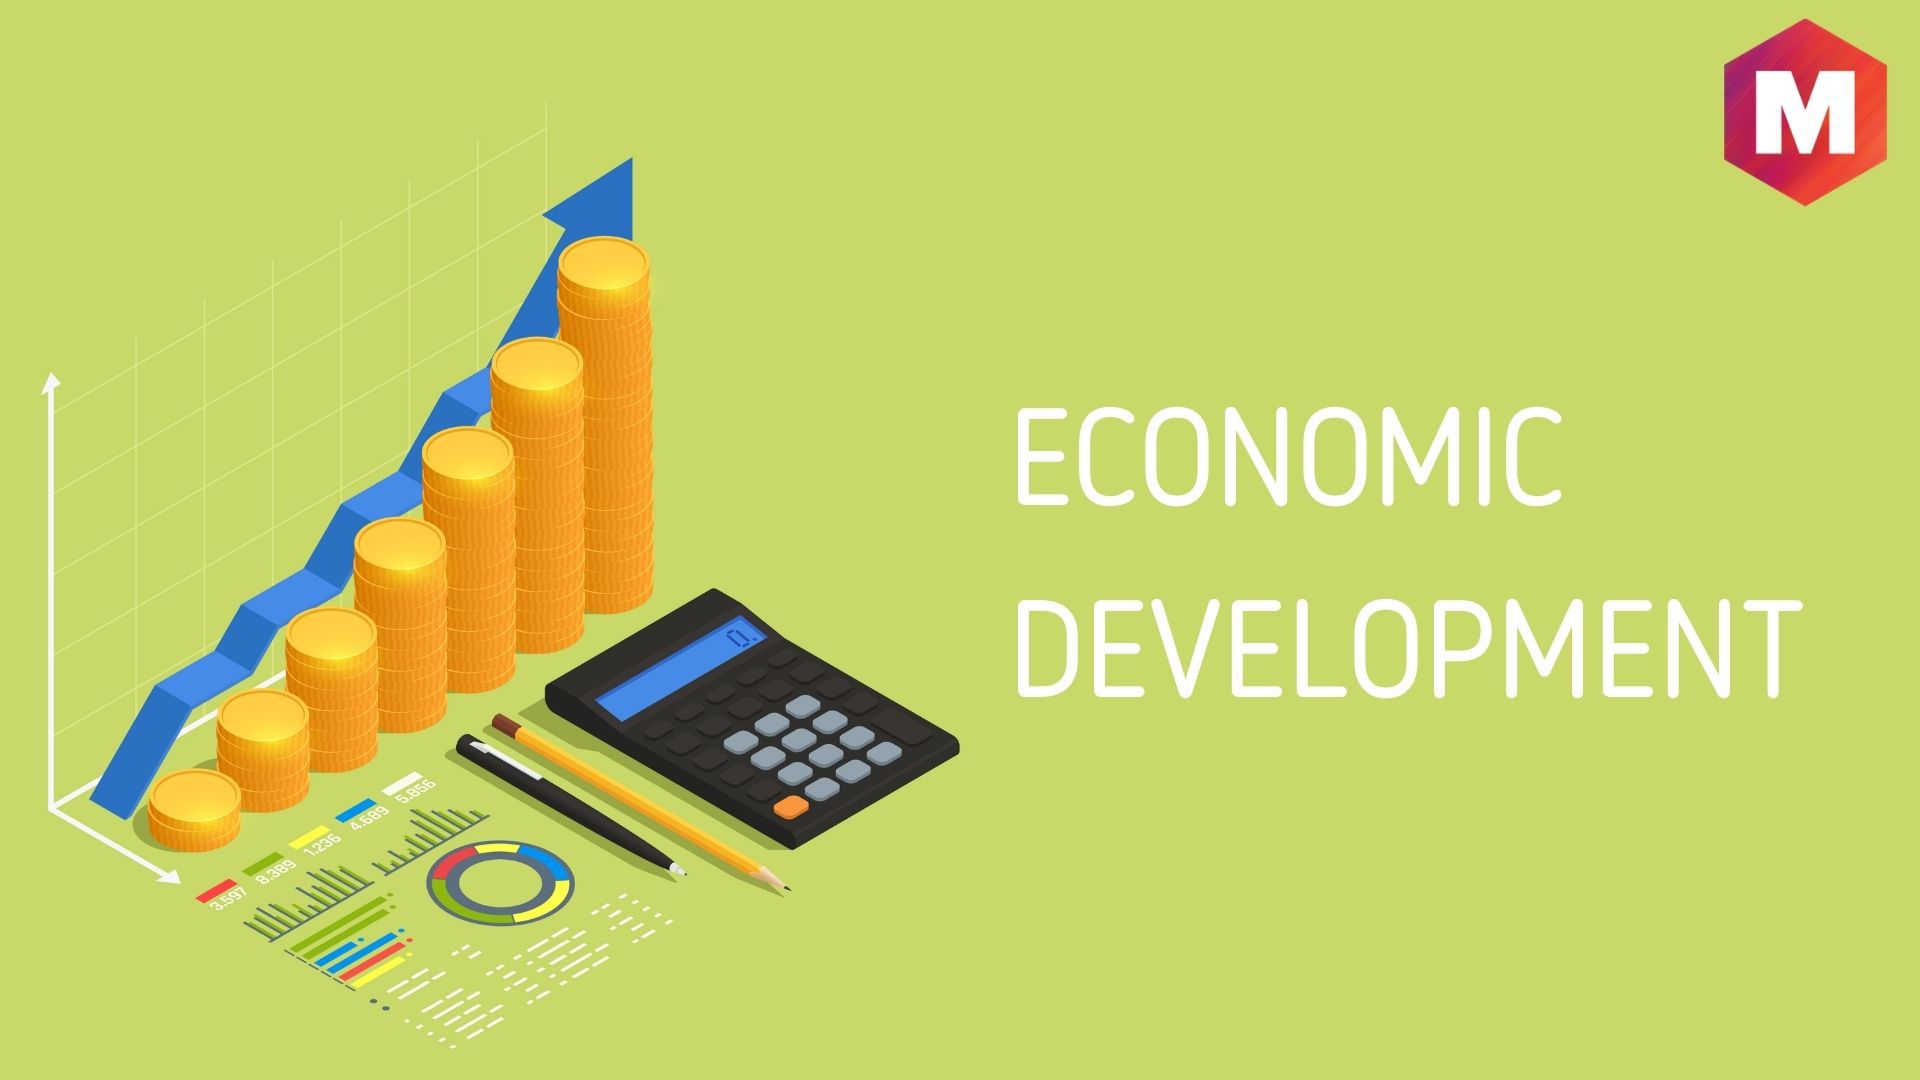 Economic Development - Definition, Meaning, Types and Features | Marketing91